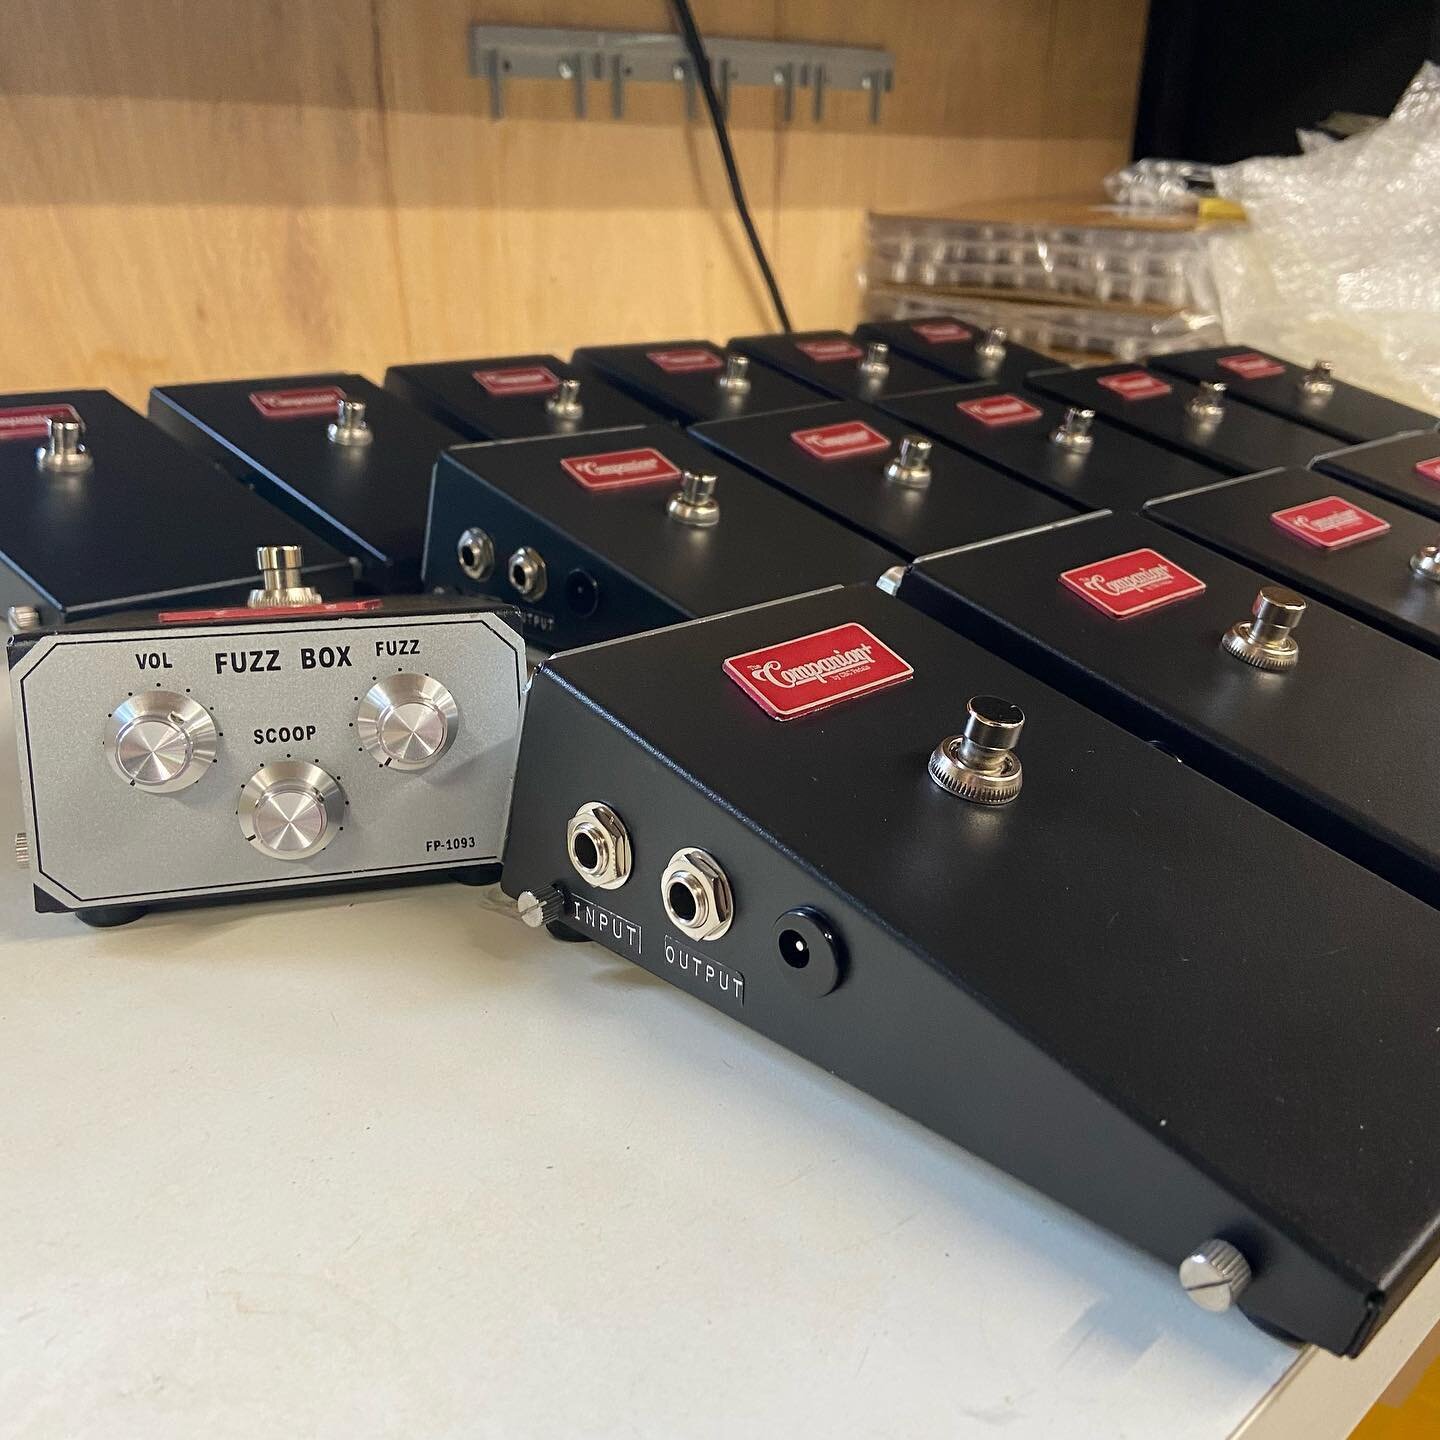 Production is ramping up! Announcement soon!
.
.
.
.
#cbcpedals #wiring #pedal  #pedalboard #guitar #guitarist #music #geartalk #knowyourtone #effectspedals #bassist #pedals #musician #gear #guitarpedals #gearpassion #gearporn  #guitar #knowyourtone 